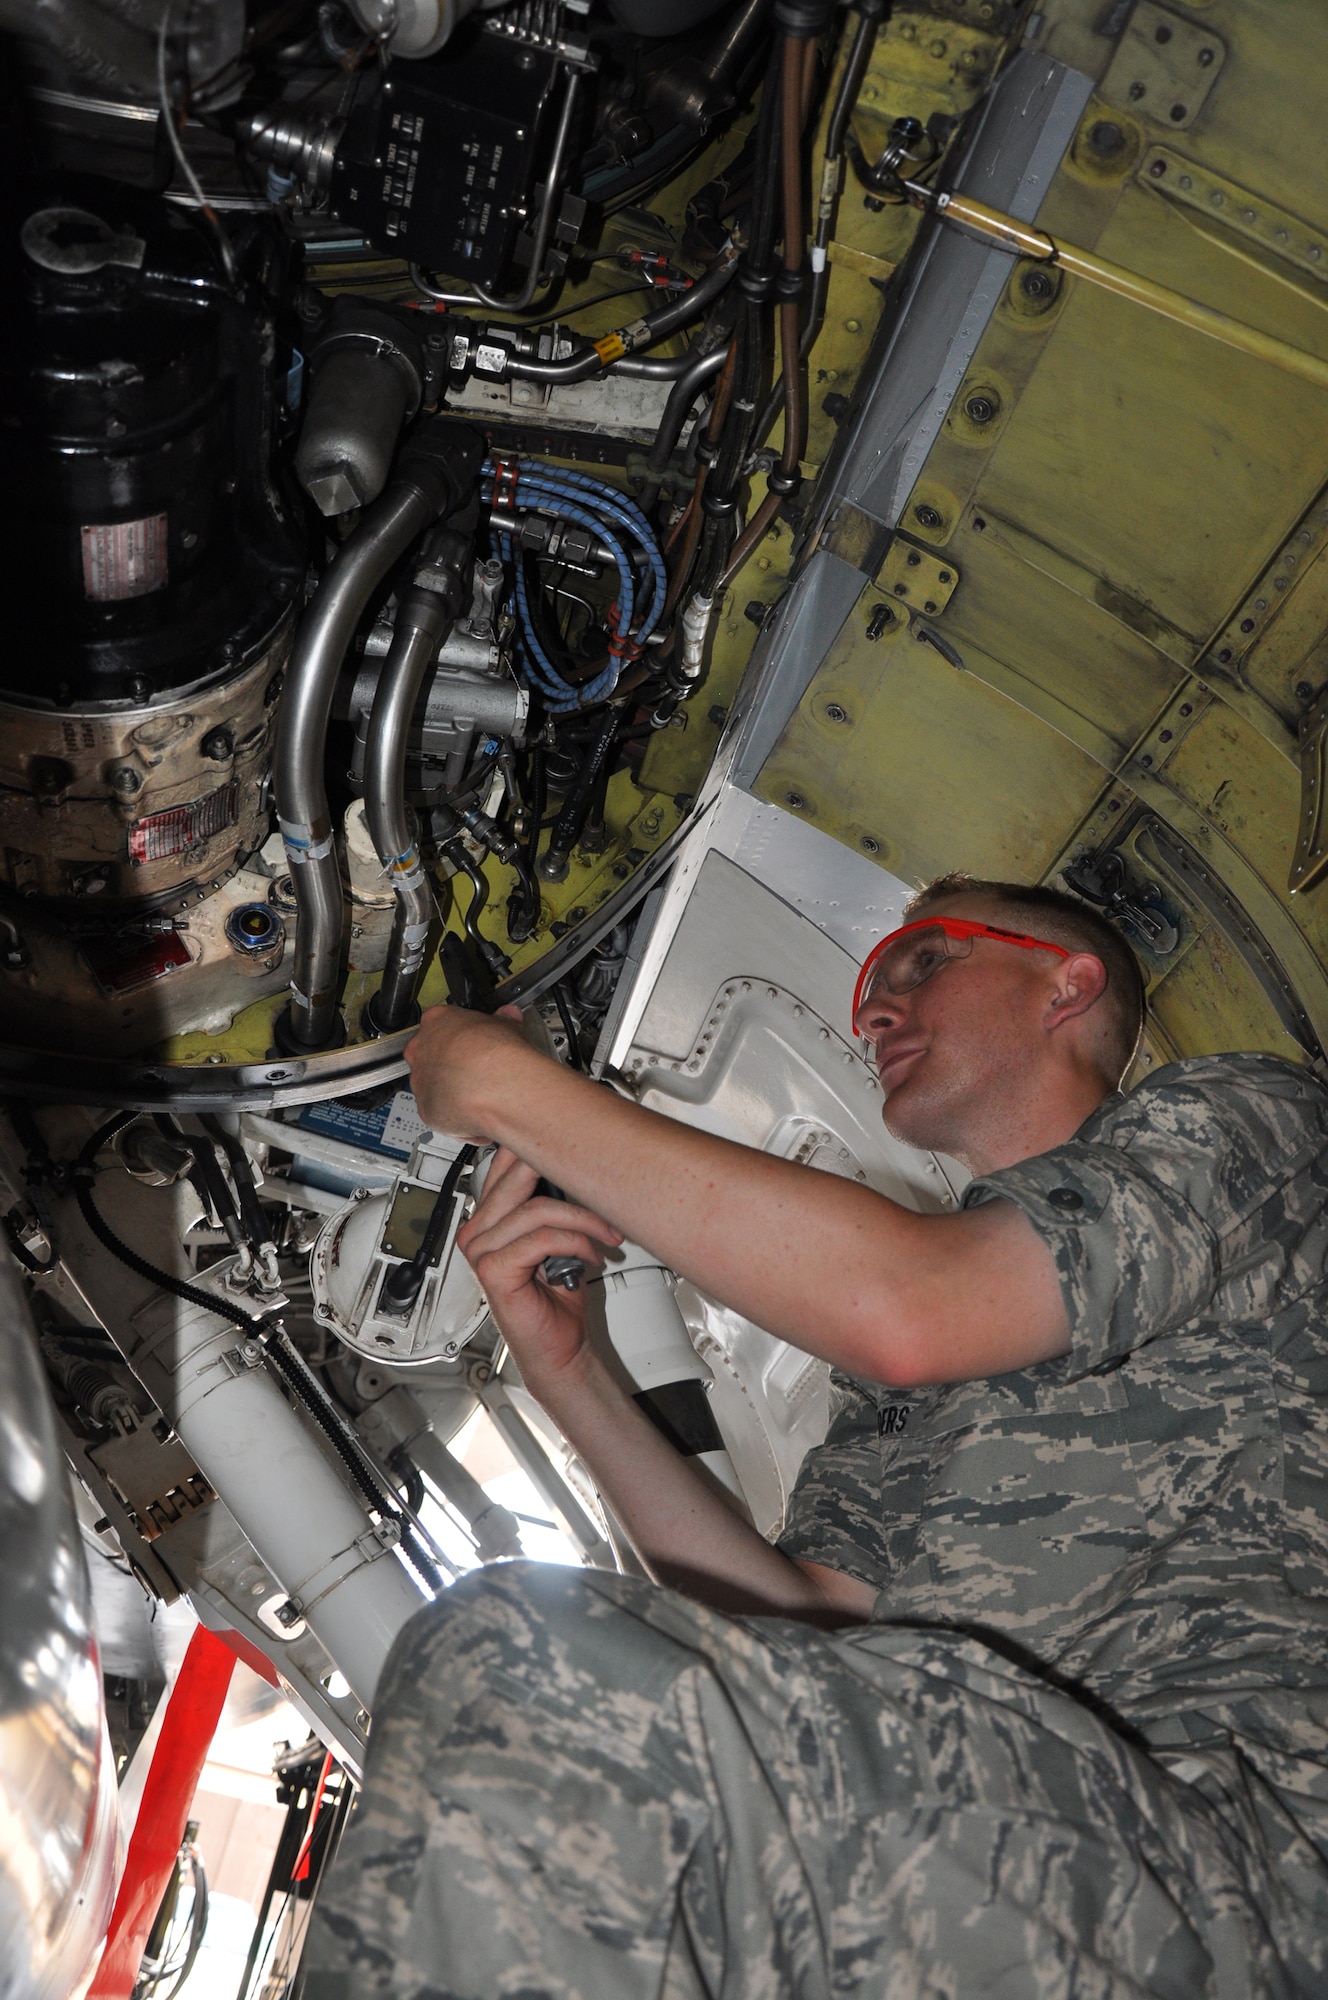 Airman Basic Michael Sanders practices a safety wiring procedure on an F-16 engine during the F-16 Aircraft Maintenance Apprentice Course in Hangar 1040 at Sheppard Air Force Base, Texas, July 16. Airman Sanders, F-16 aircraft maintenance student, said safety wiring is when a wire is used to secure a component after it has been torqued and tightened. The procedure ensures that if a part starts to come loose, the safety wiring will still secure the component. (U.S. Air Force photo/Tech. Sgt. Vernon Cunningham).